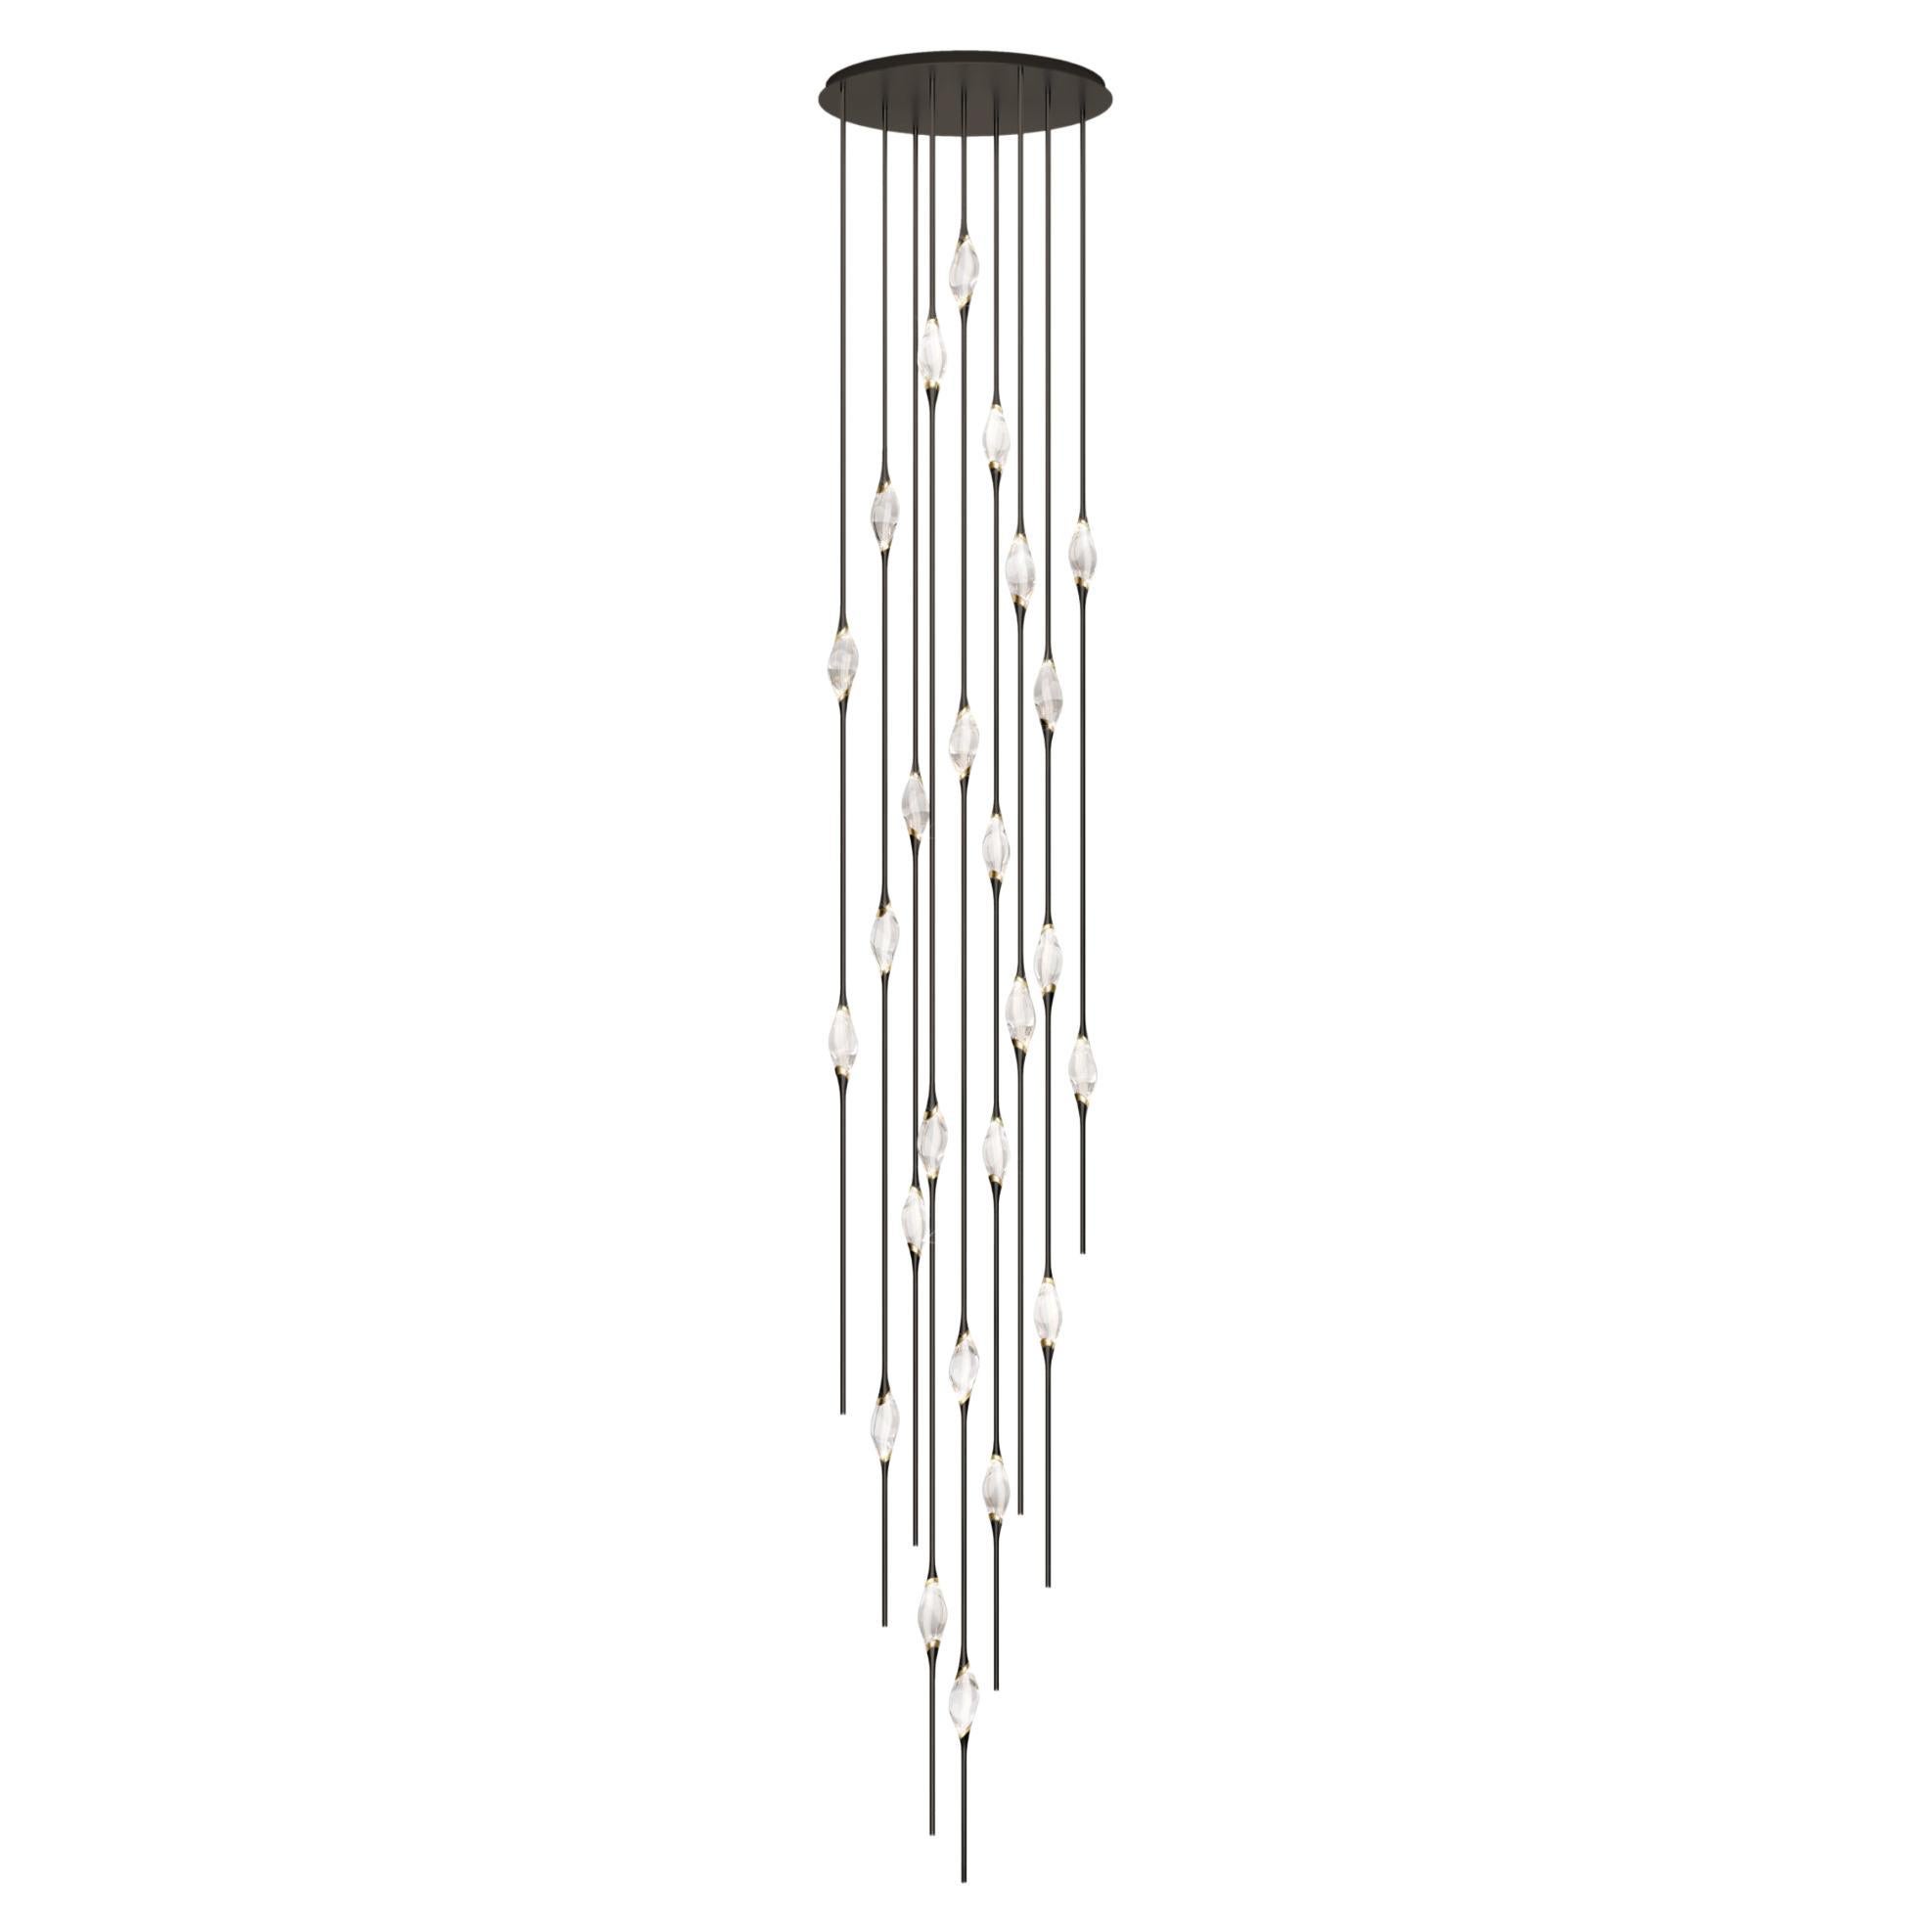 "Il Pezzo 12 Cluster Chandelier" - height 550cm/216" - black and polished brass For Sale